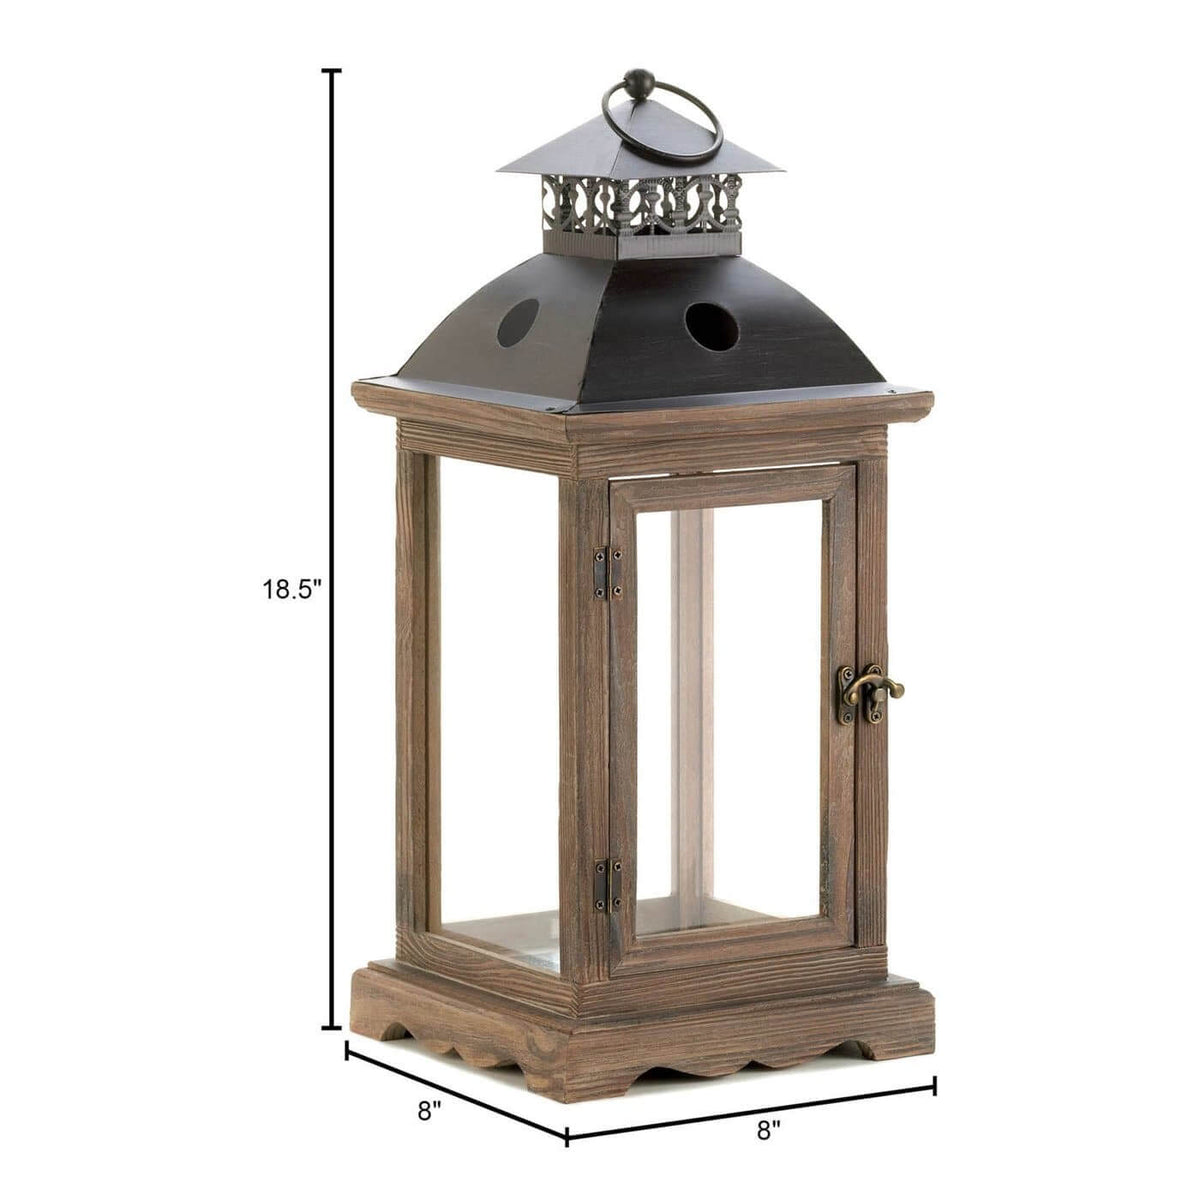 Large Rustic Wood Lantern - The House of Awareness